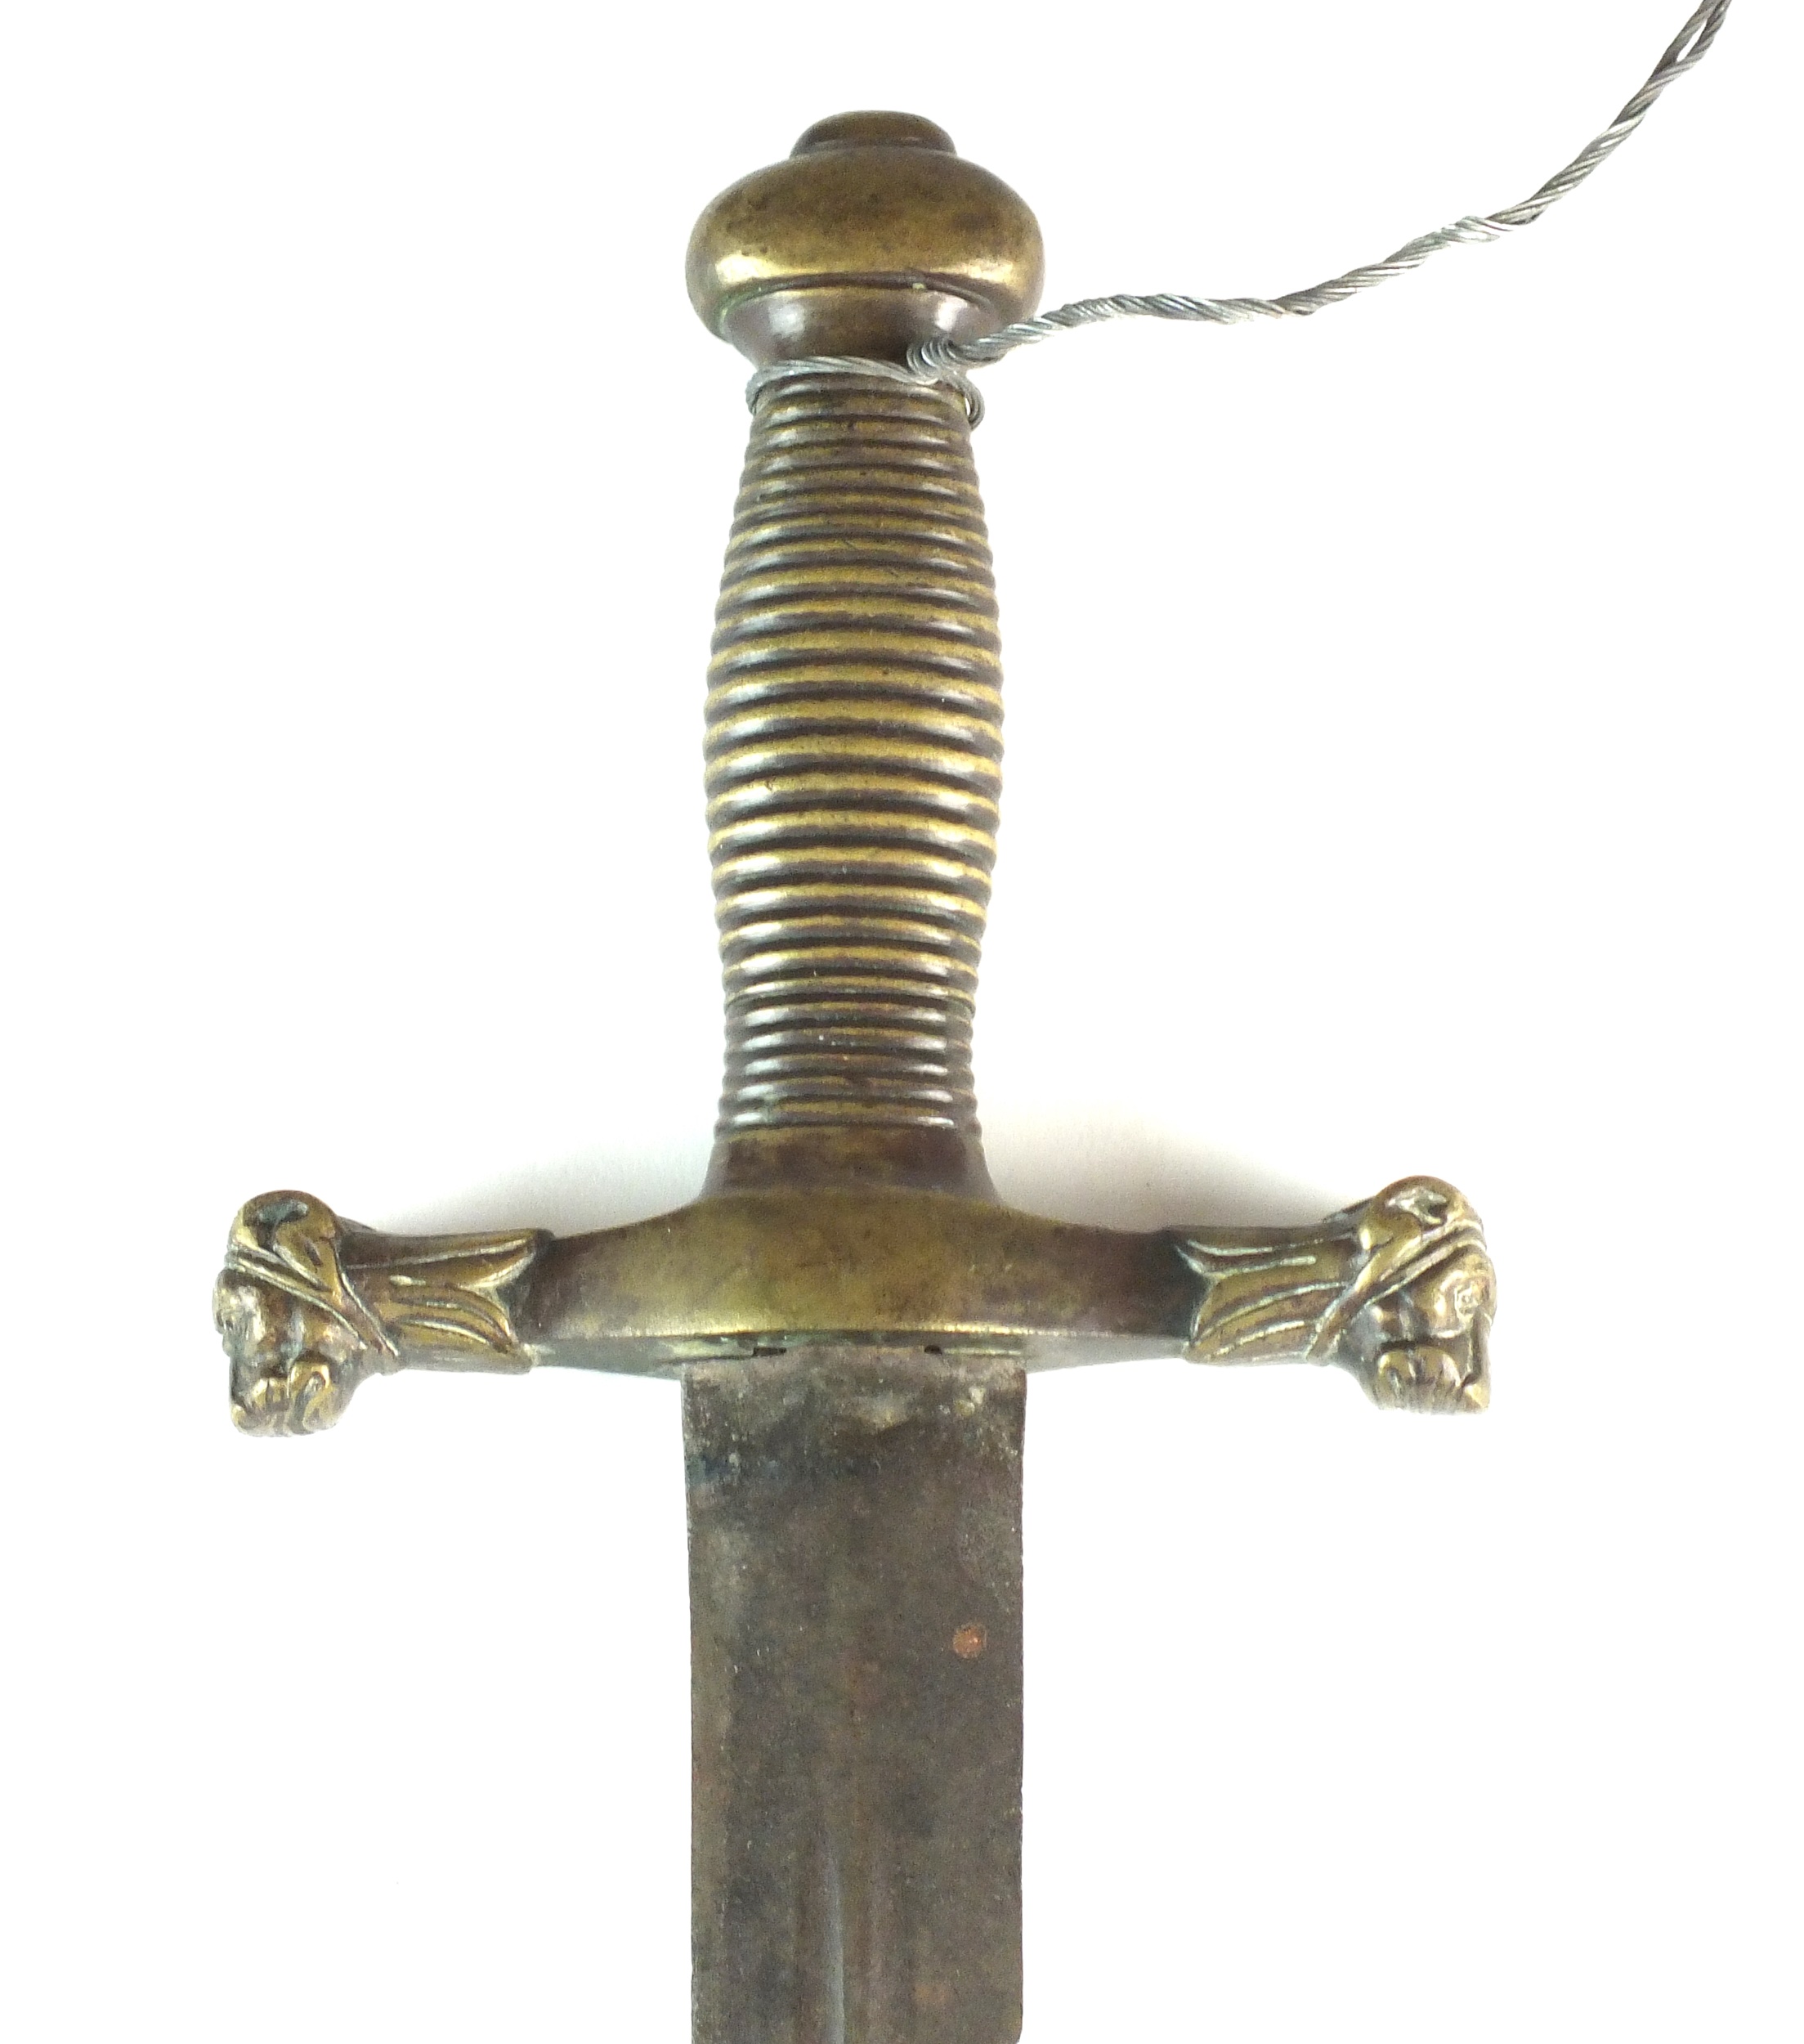 An unusual Gladius-type sword with a South-East Asian dagger